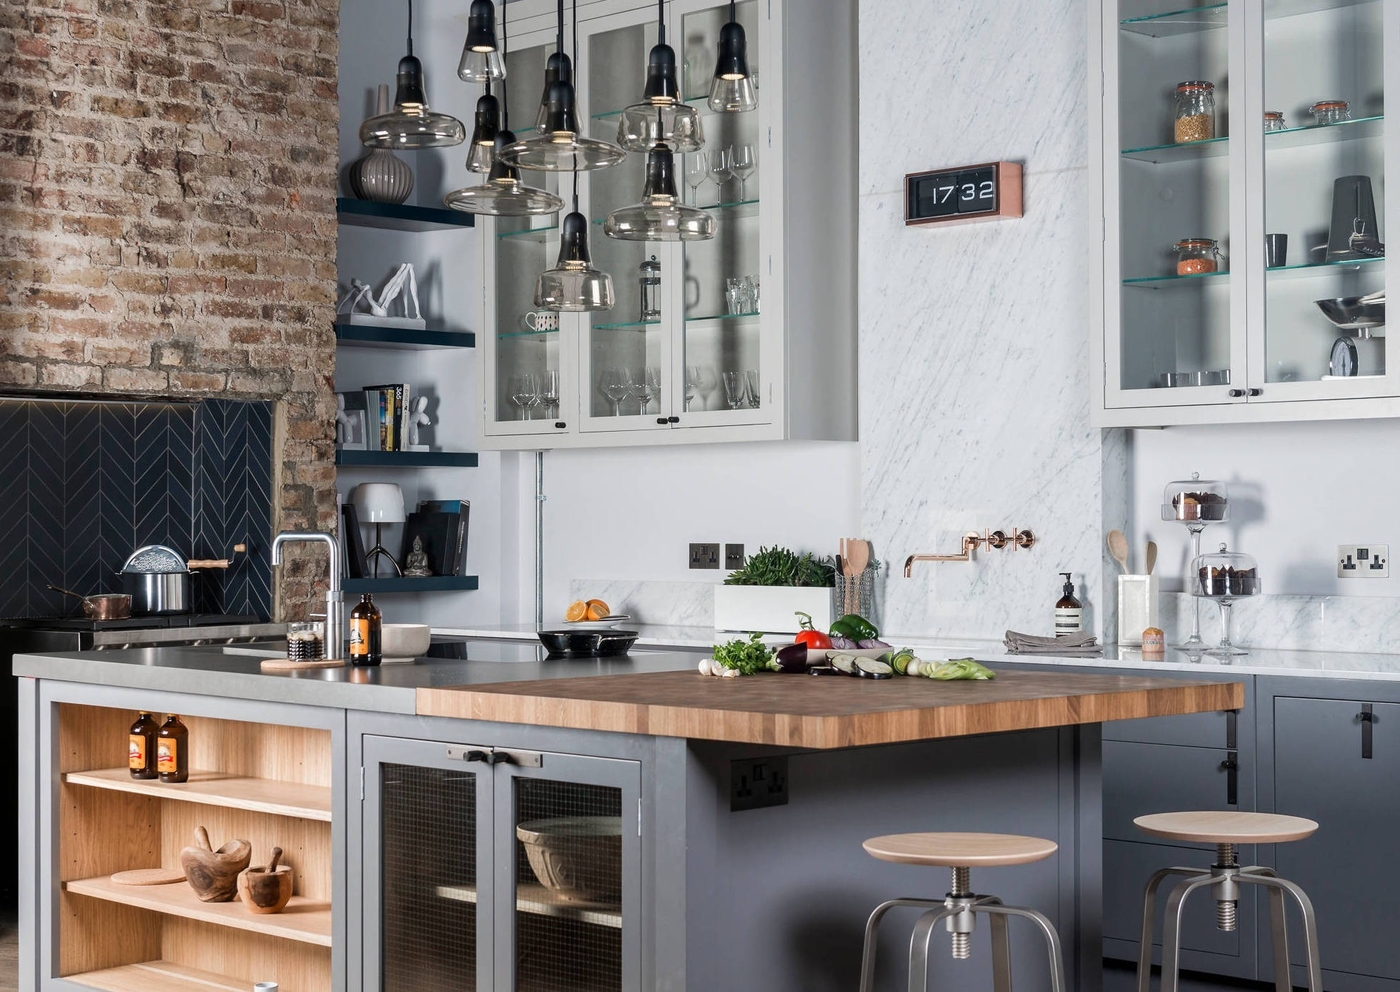 Industrial aesthetic: kitchen design - Completehome